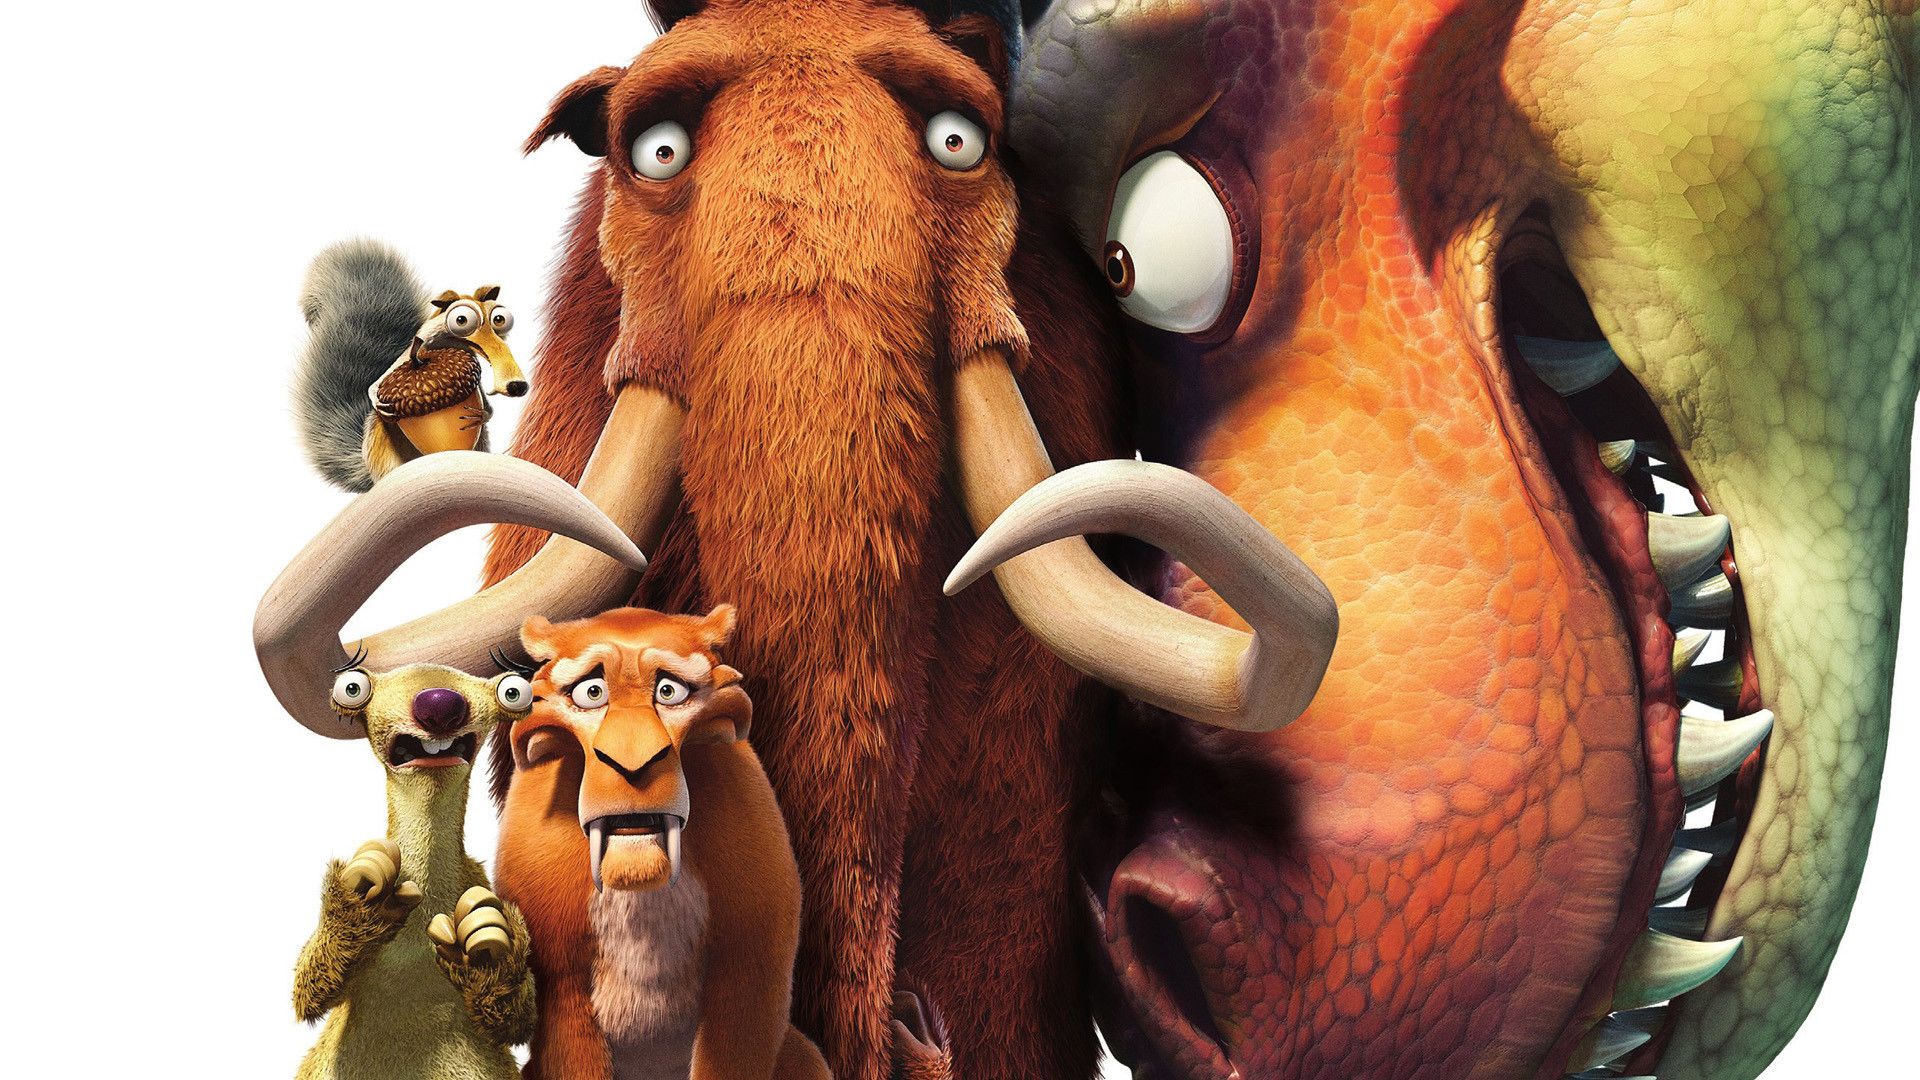 Ice Age: Dawn of the Dinosaurs background